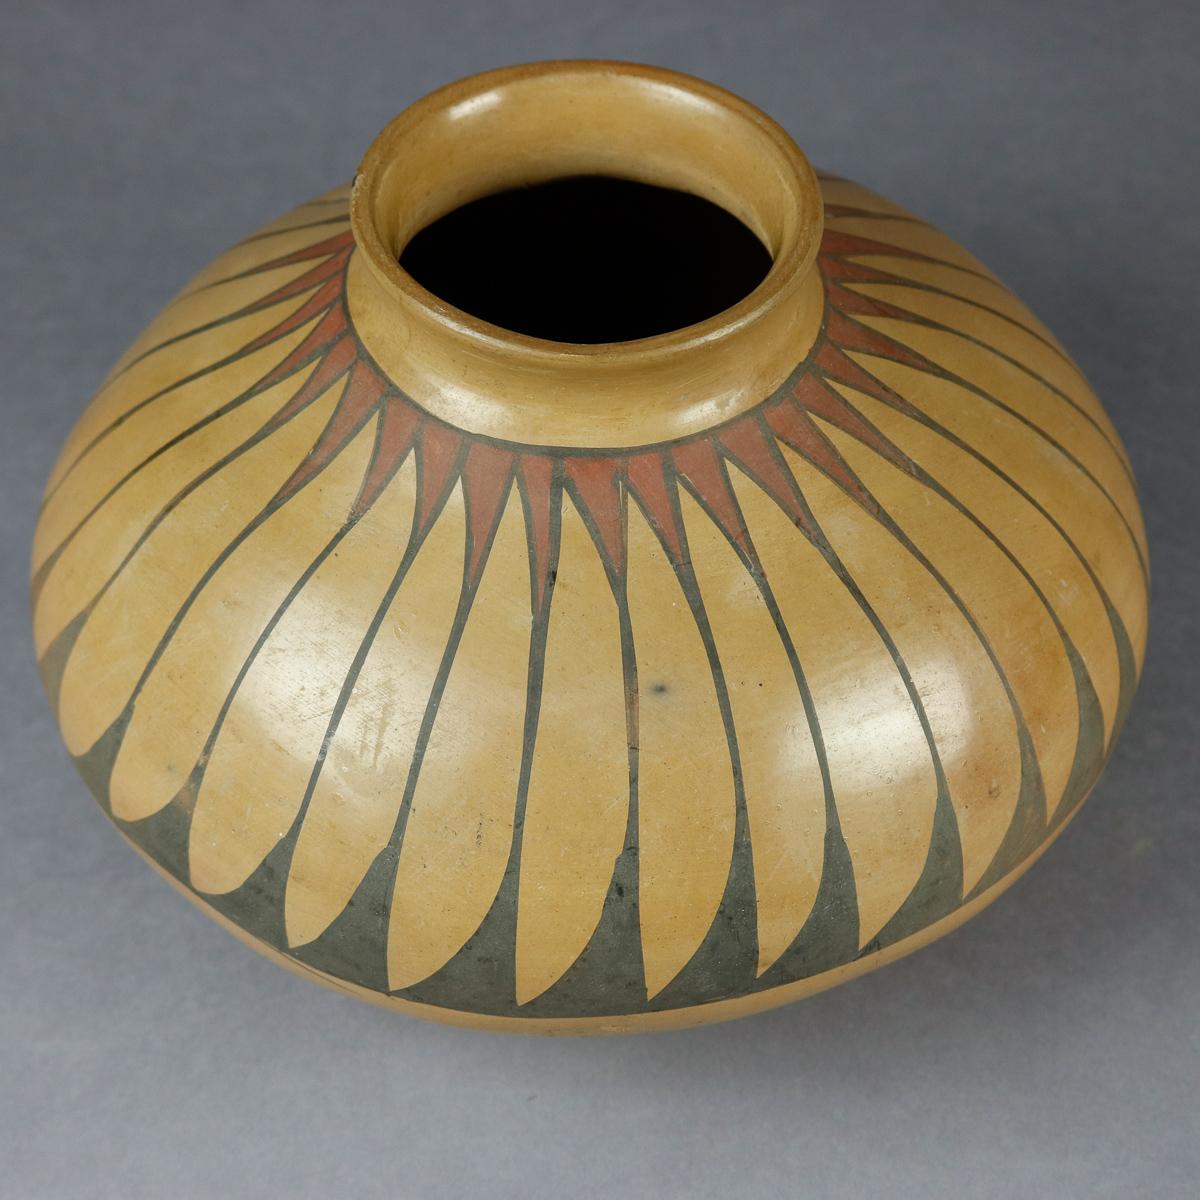 An antique Southwest Native American Indian hand thrown pottery vase from the Acoma Pueblo offers bulbous form with polychromed repeating stylized feather band hand painted with yucca brush, circa 1900

Measures: 7